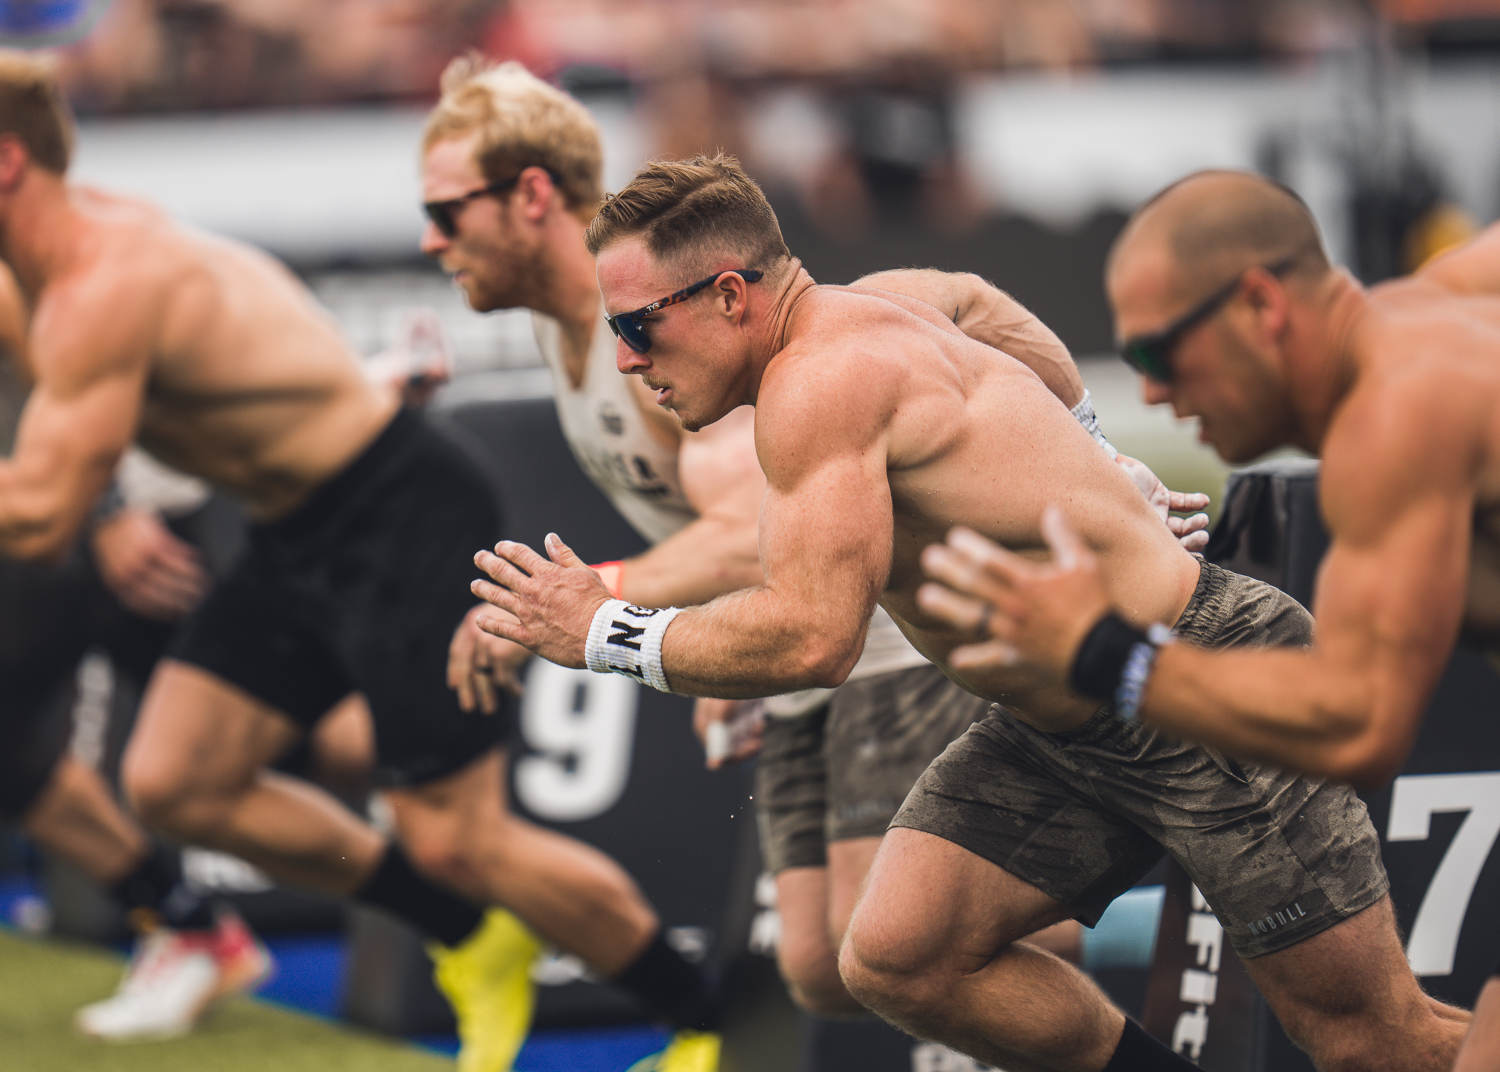 Do Crossfit Athletes Take Steroids? A Full Review